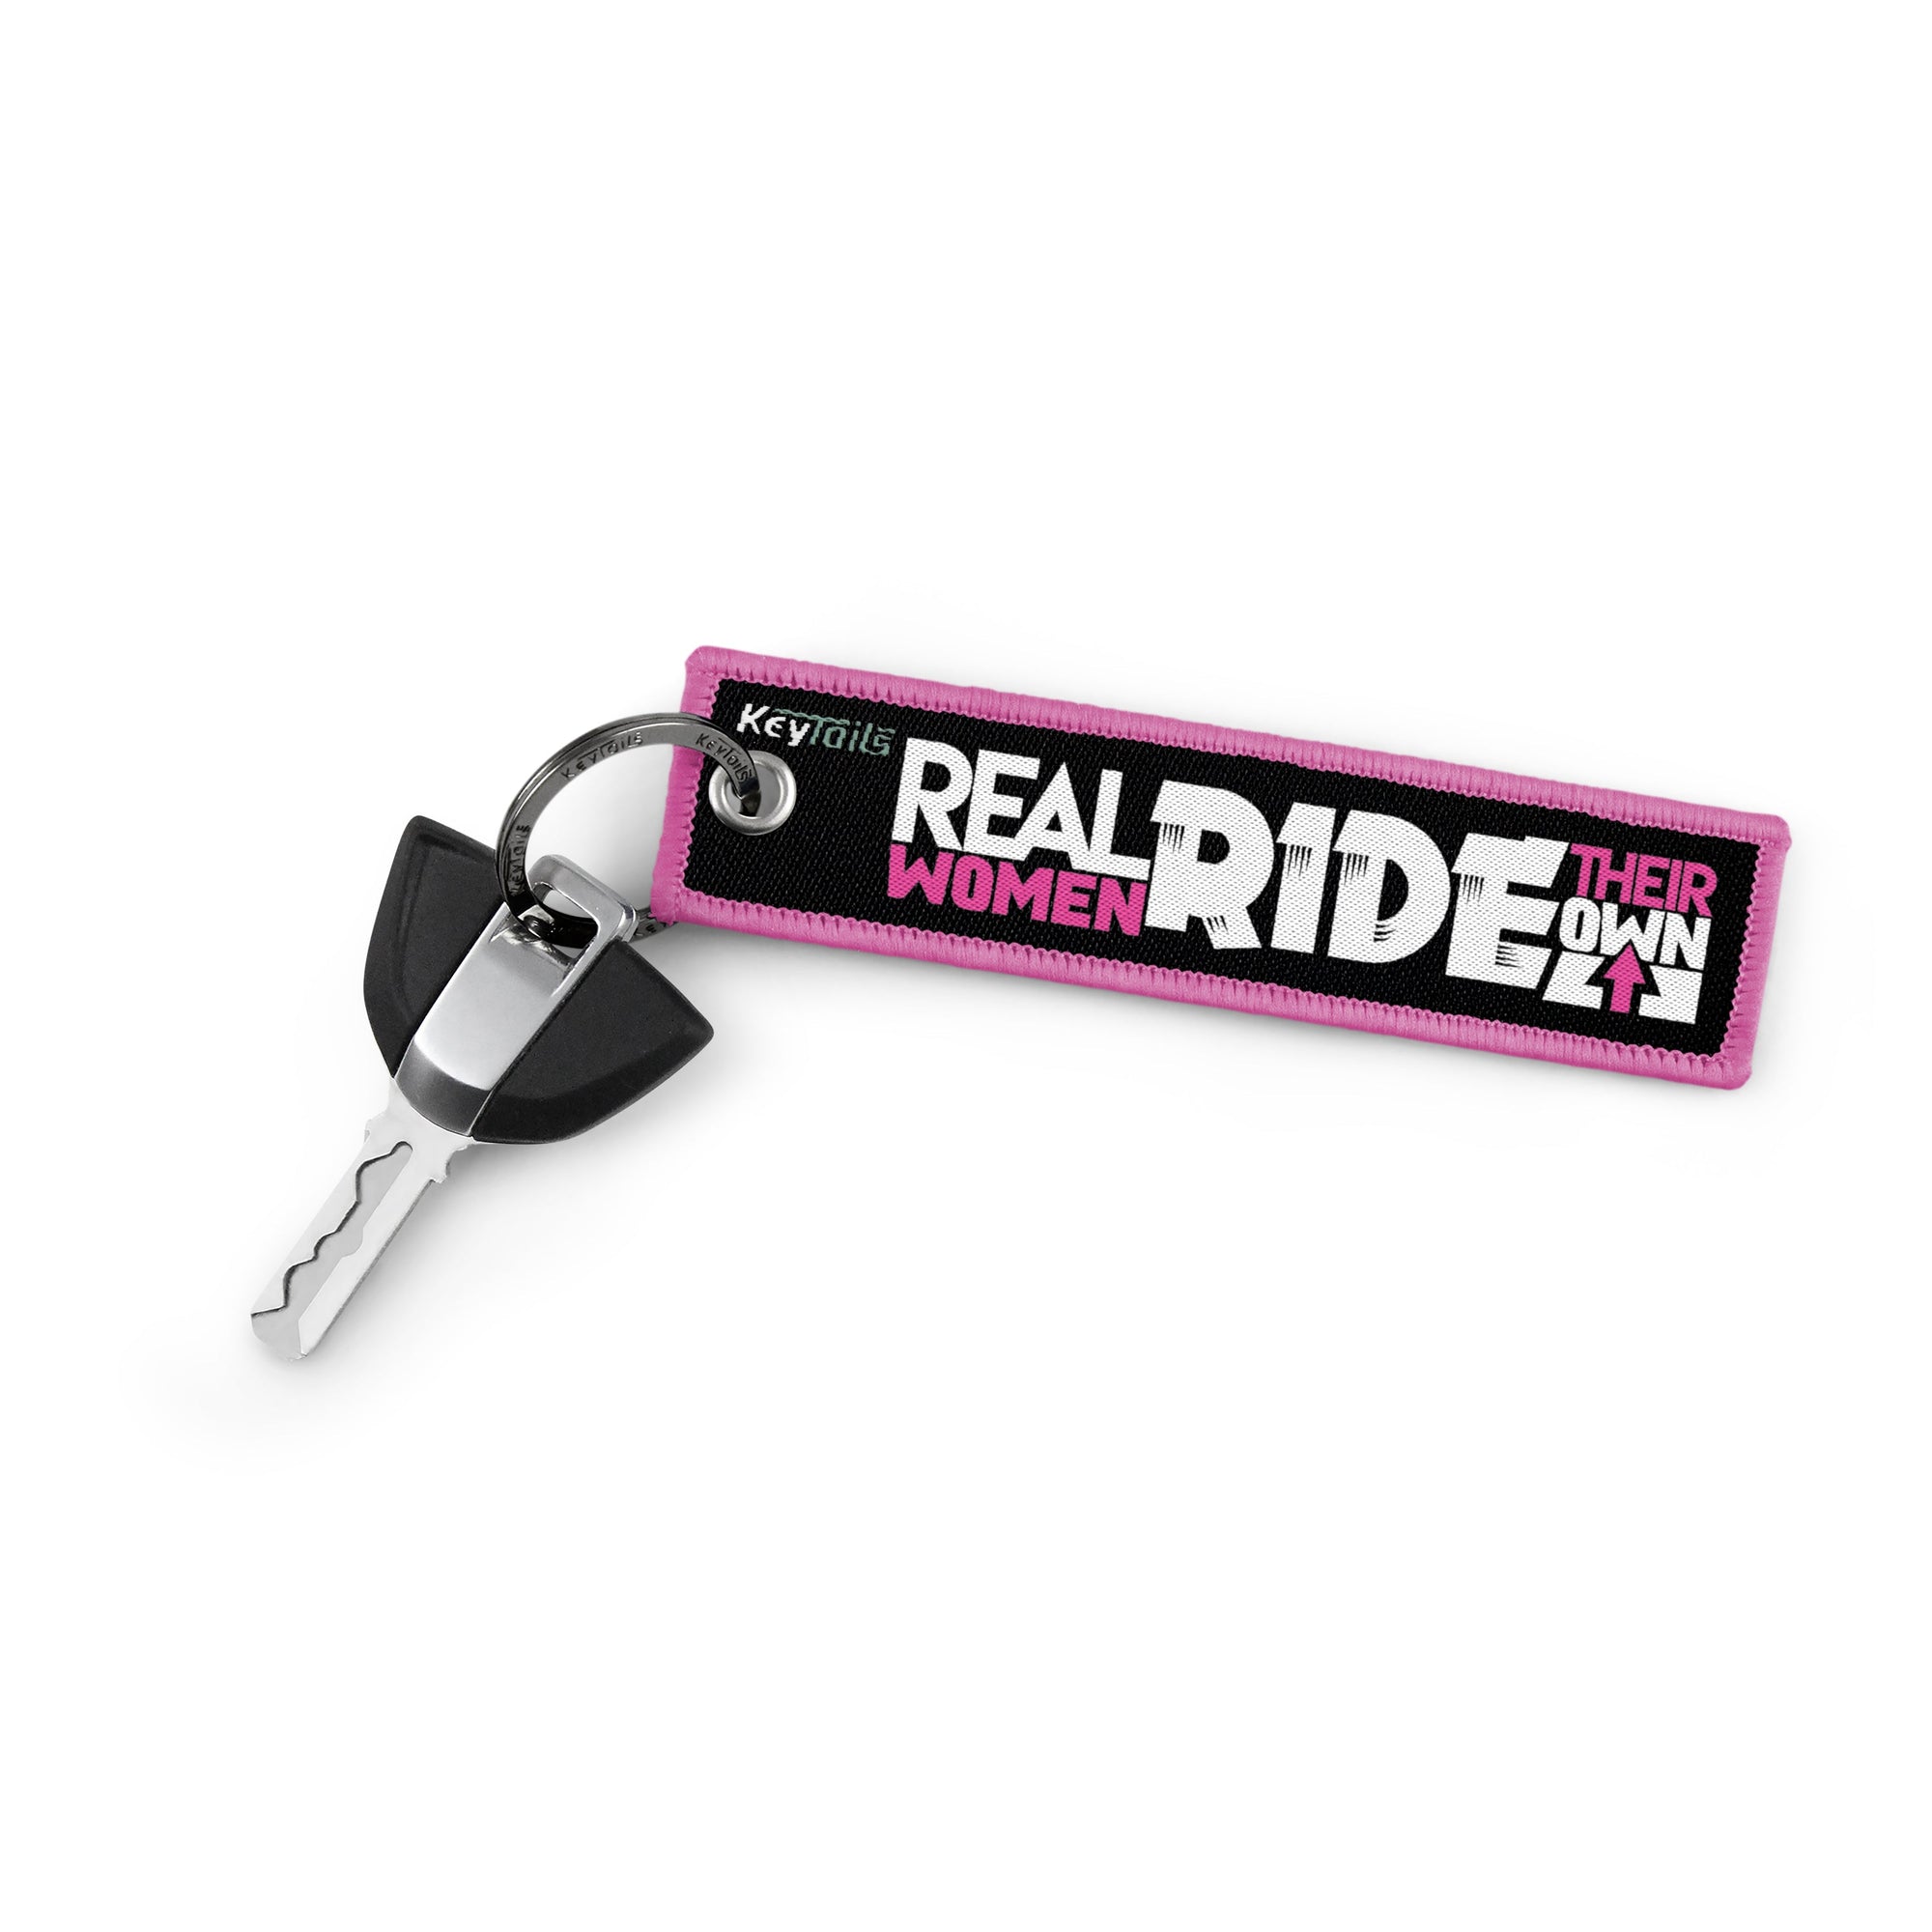 Real Women Ride Their Own Keychain, Key Tag - Pink